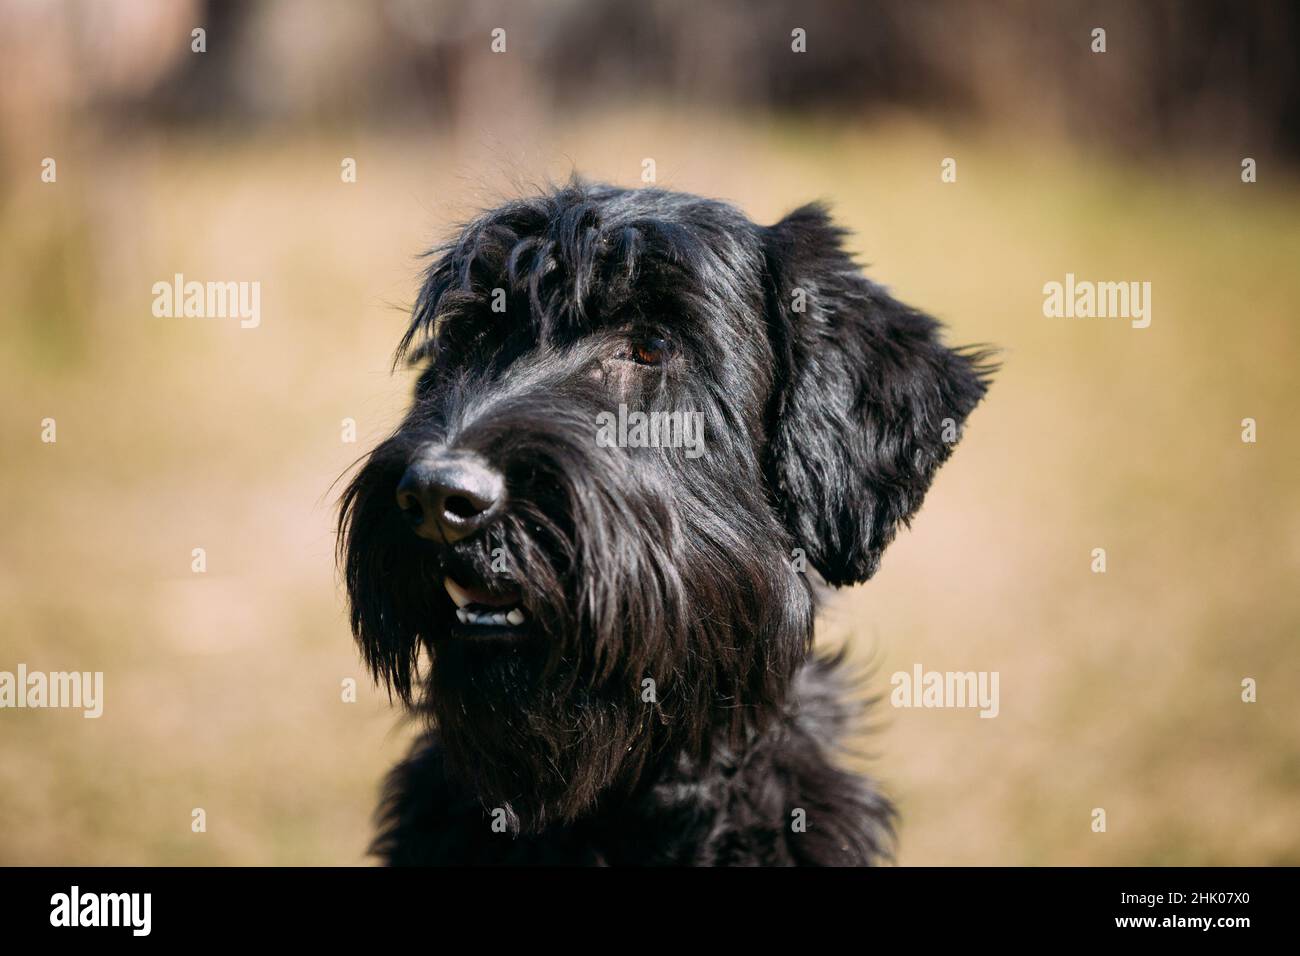 are carrots good for a standard schnauzer